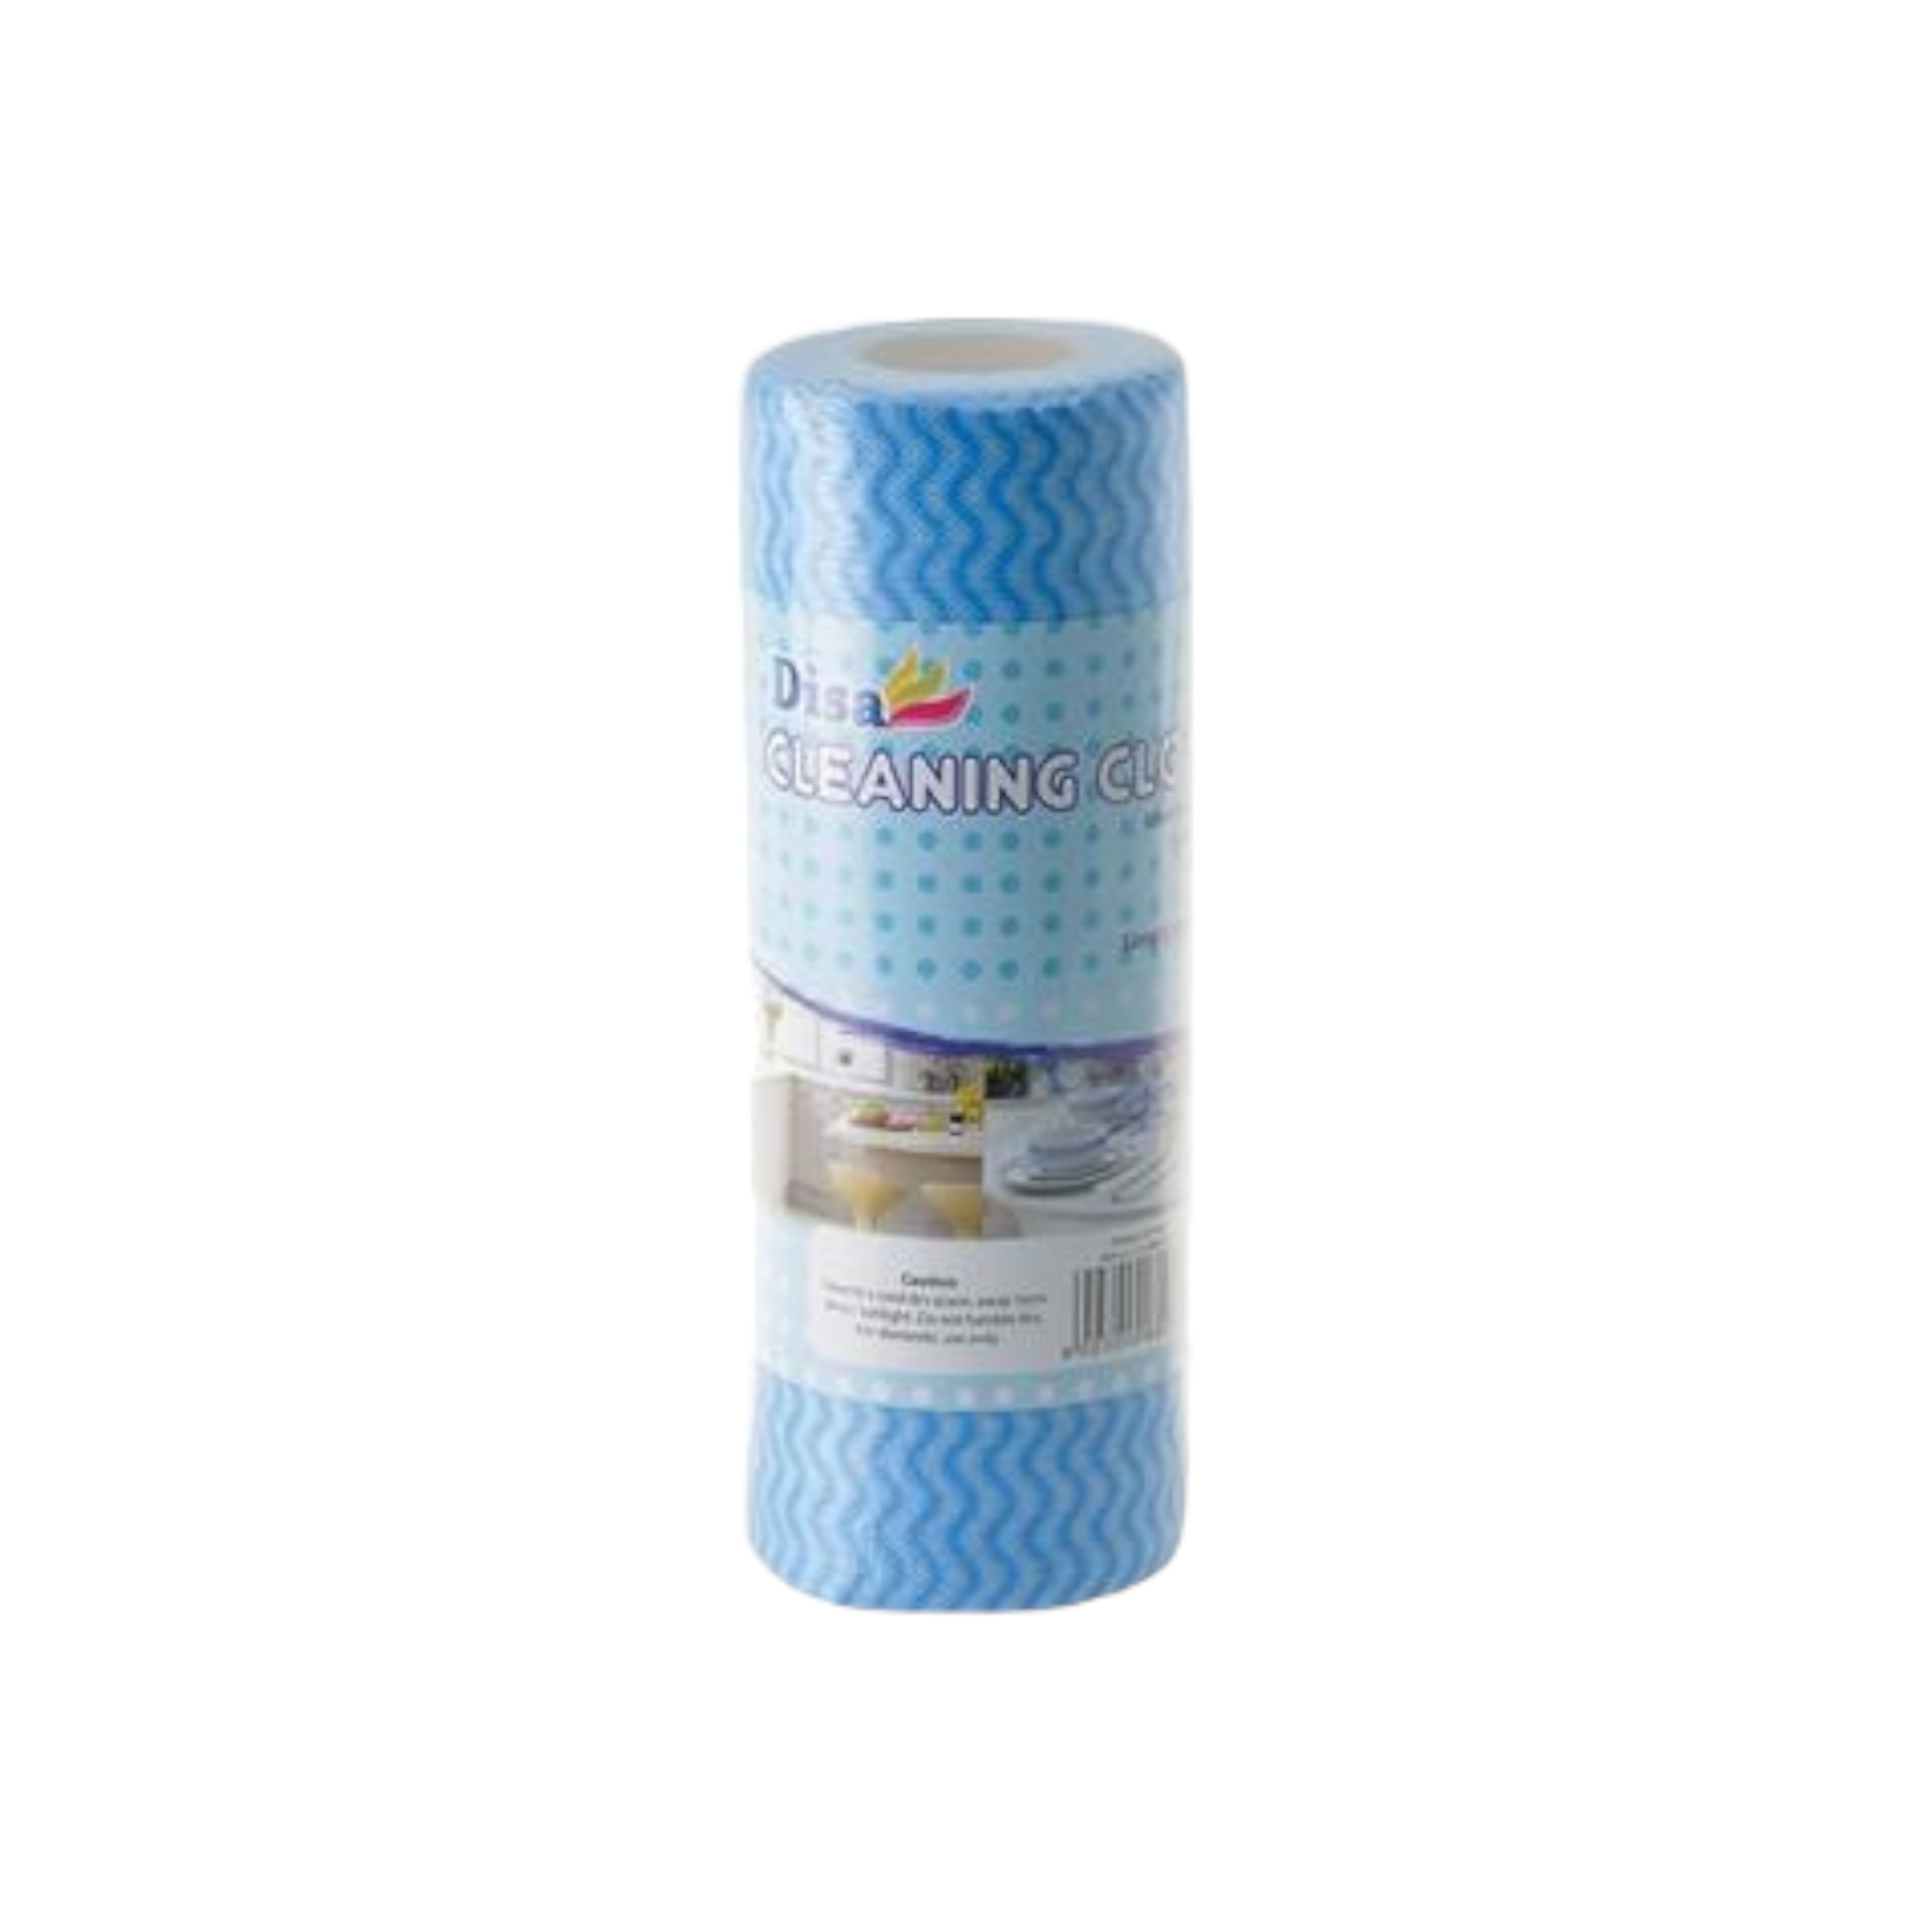 Disa Cleaning Cloth Roll 50x22cm Blue or Pink 30pcs